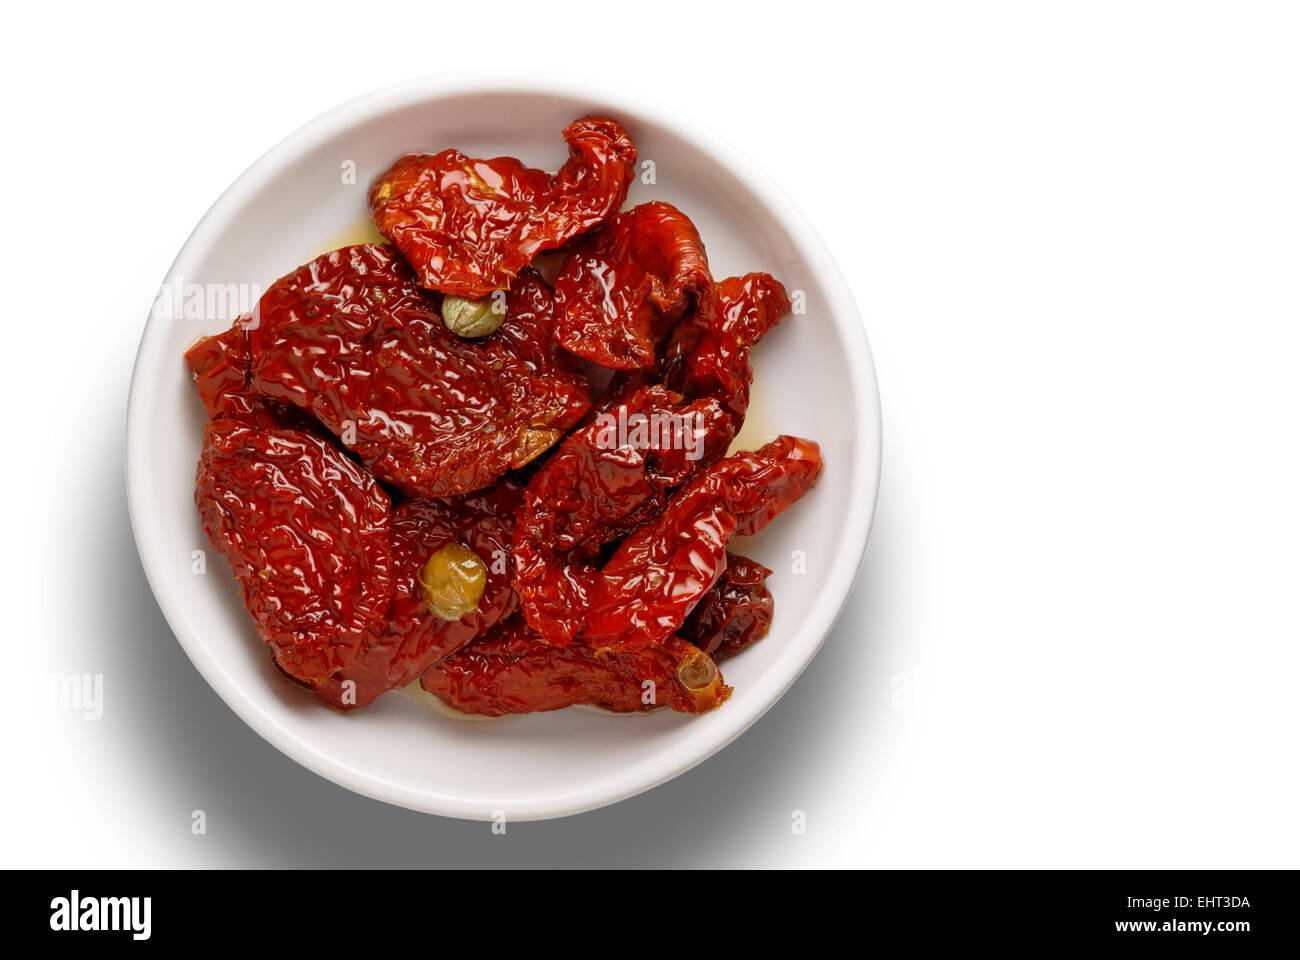 Dried tomatoes in a dish Stock Photo